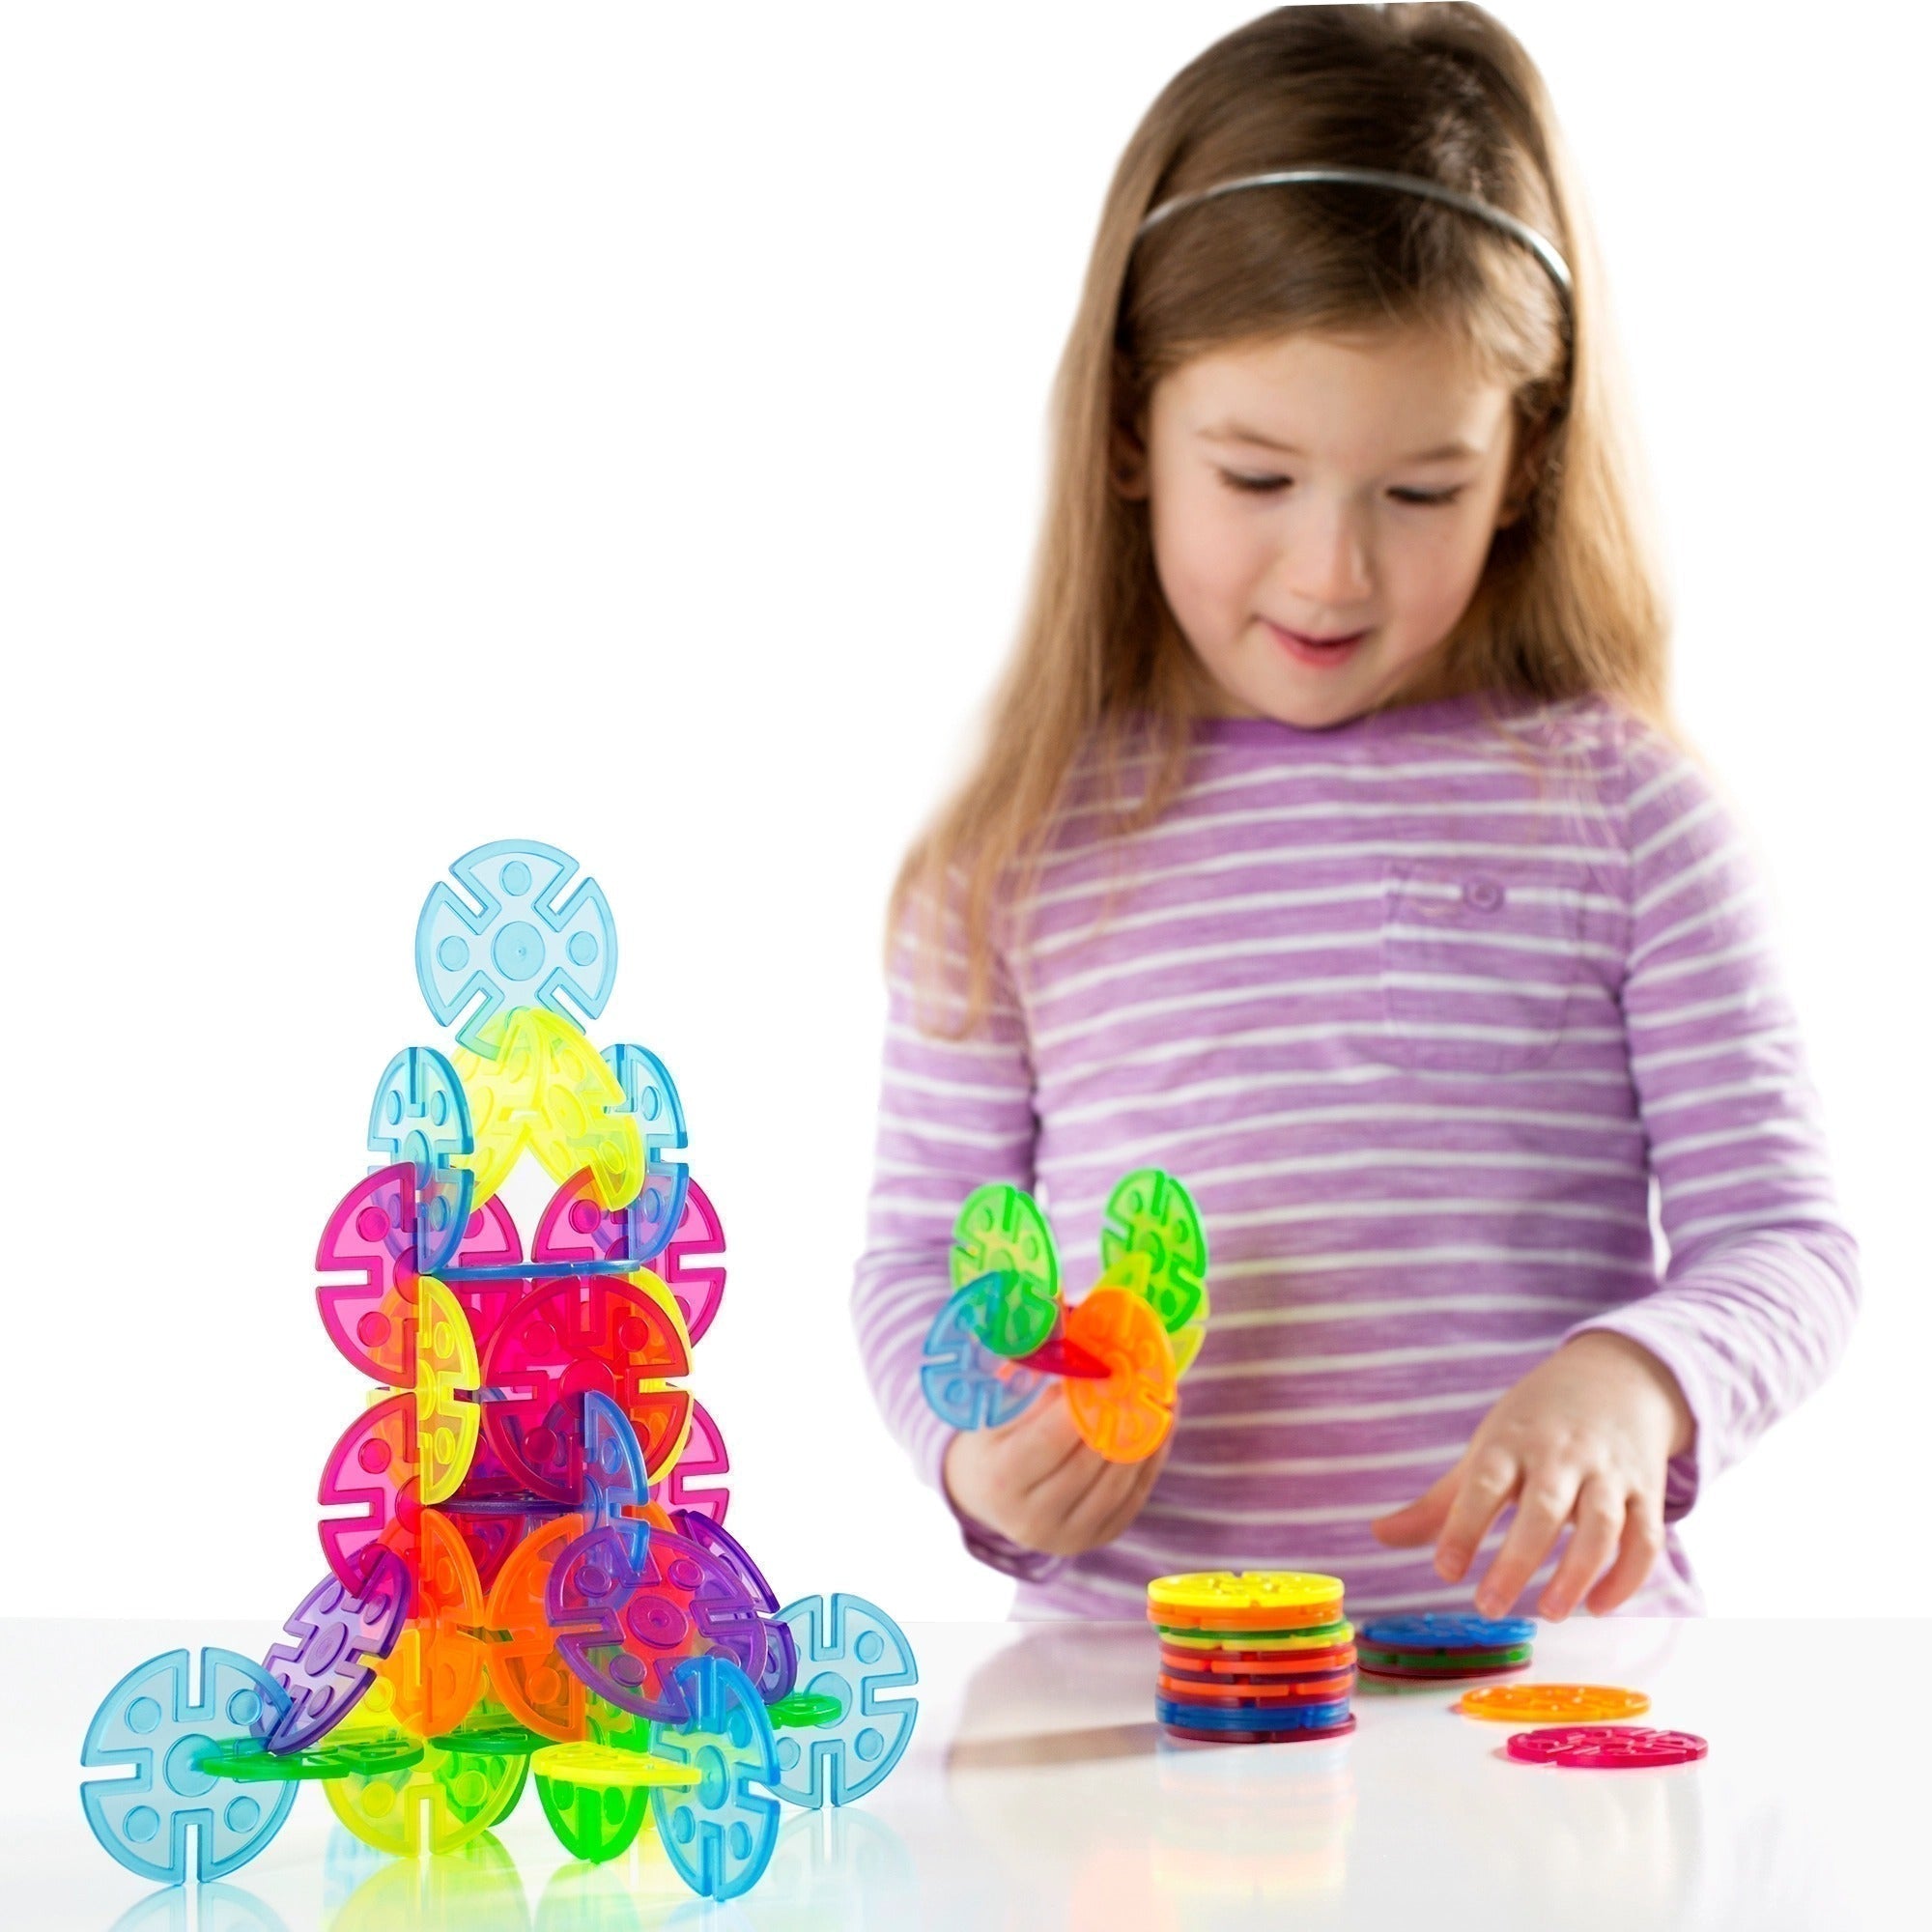 Interlox Discs 96 Piece Set, Interlox Discs provide colorful, easily interlocking building pieces to engage children in open-ended play. The Interlox Discs are made of colorful, translucent plastic with multiple notches for flexible building. Use the five beautiful colors to explore color theory on the LED Light Tablet or for other light and color activities. Children explore the concepts of symmetry and asymmetry while strengthening their design, structure and engineering skills. Use with the original Inte